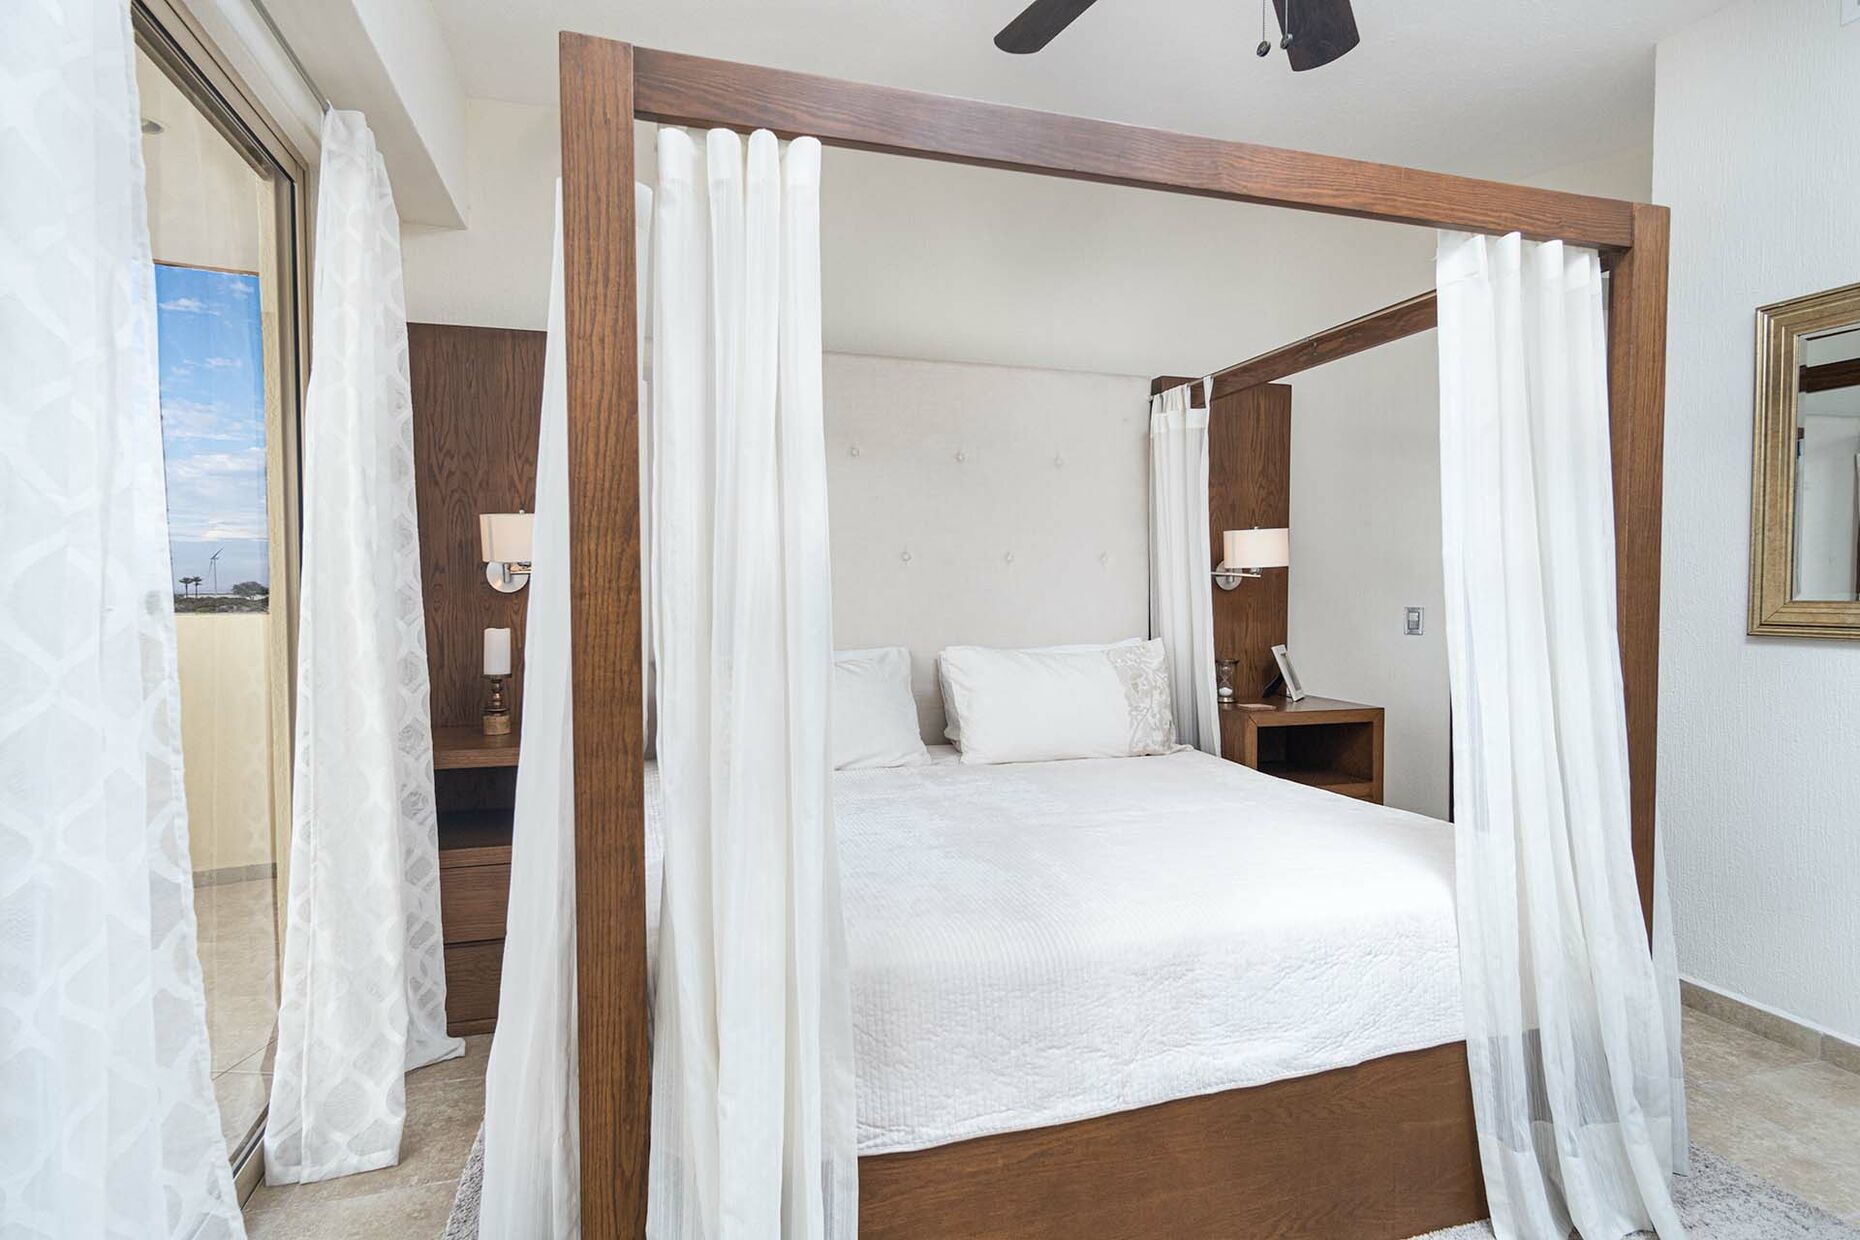 One of four bedrooms sports a romantic canopy  bed